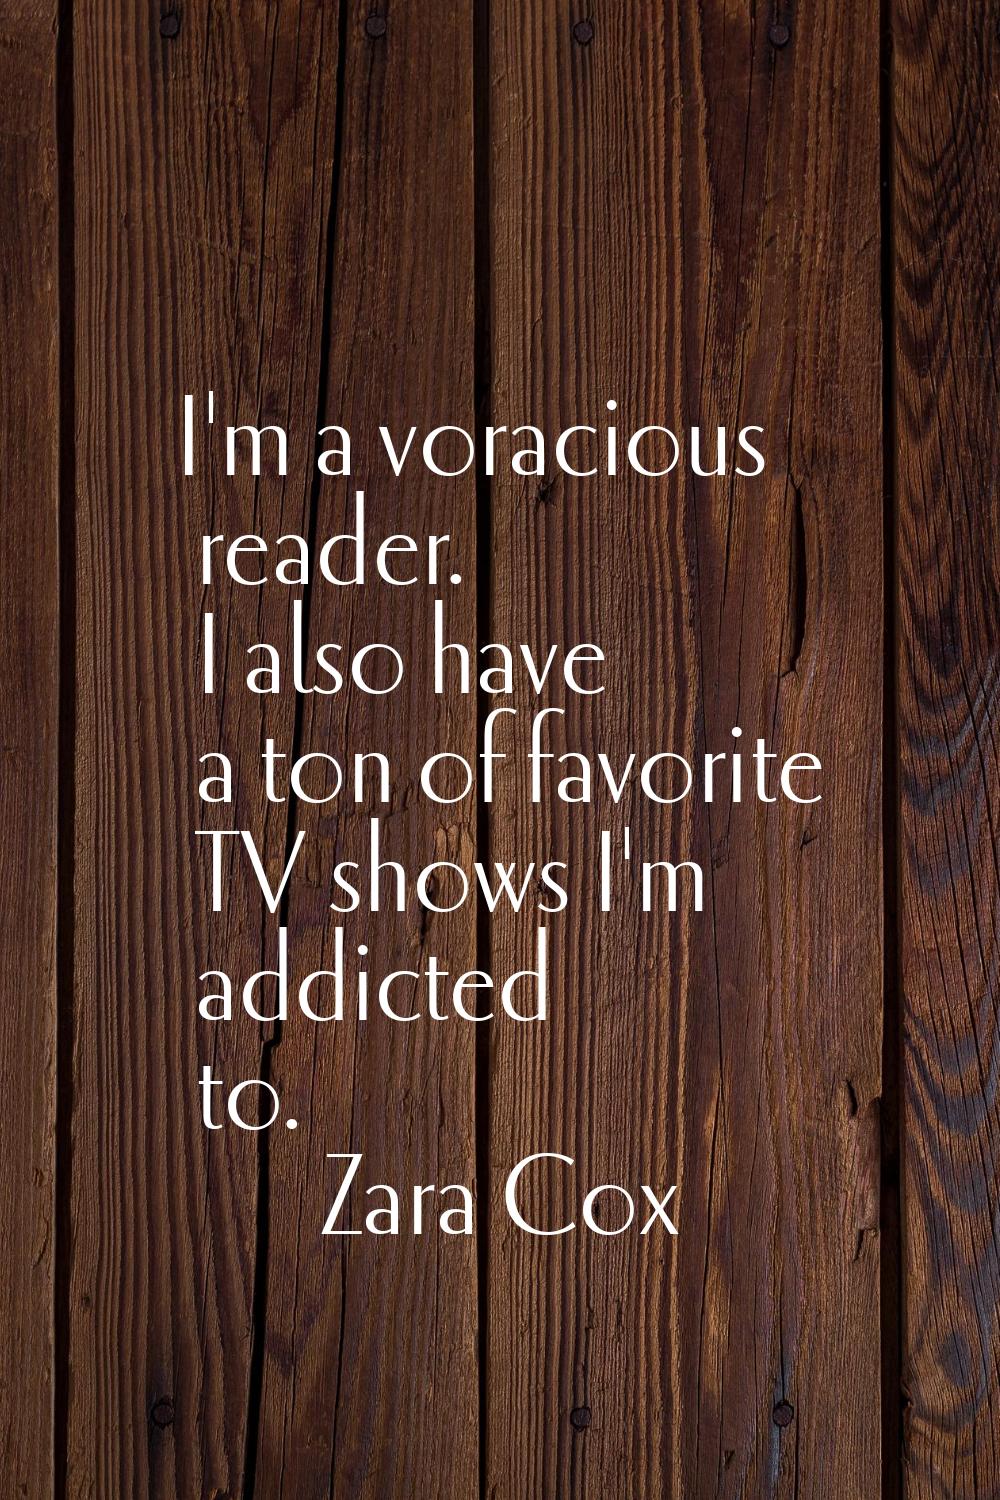 I'm a voracious reader. I also have a ton of favorite TV shows I'm addicted to.